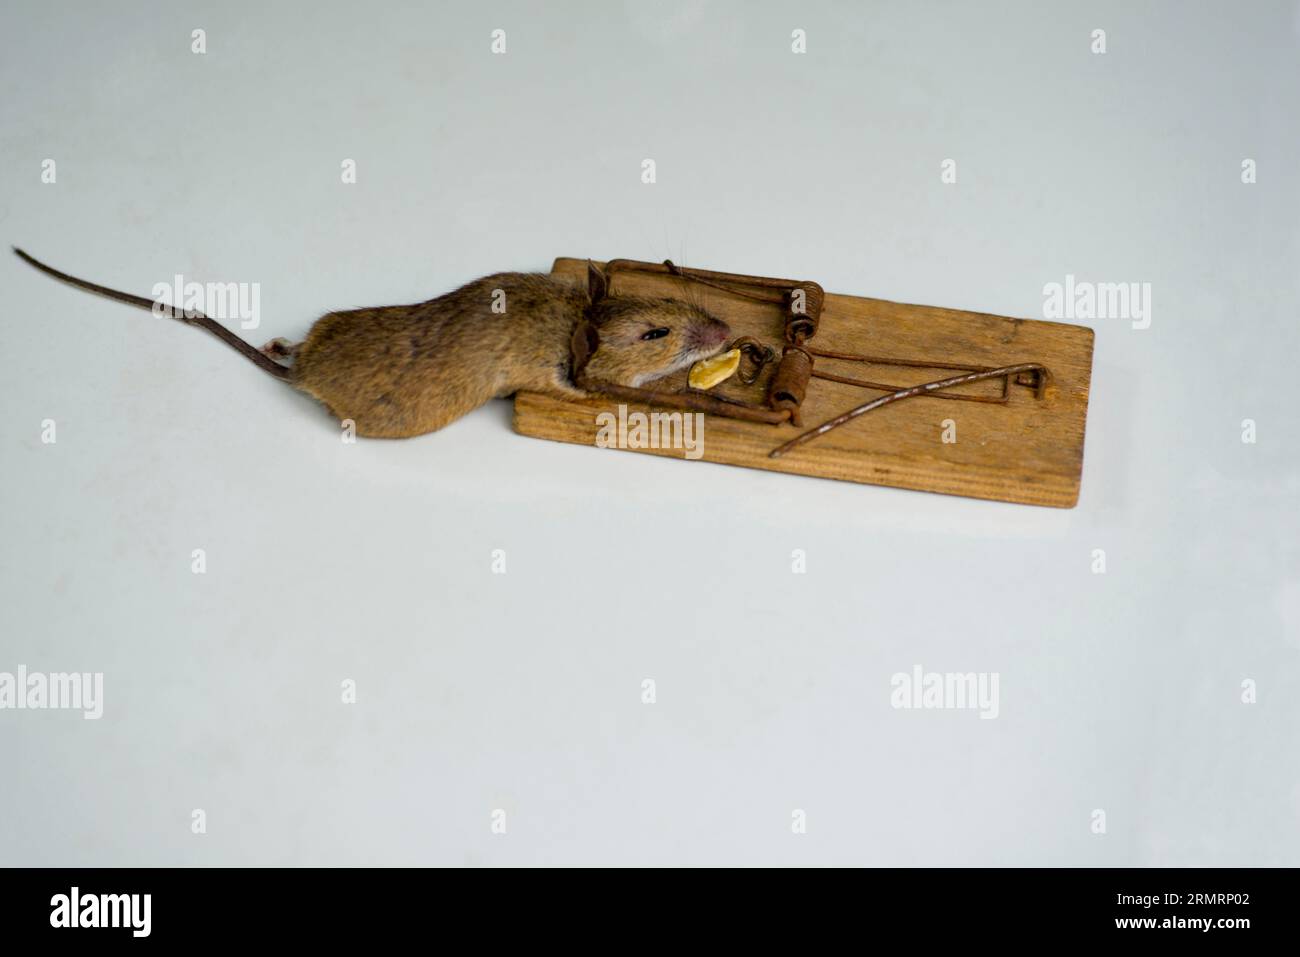 https://c8.alamy.com/comp/2RMRP02/a-mouse-catched-in-the-mouse-trap-2RMRP02.jpg